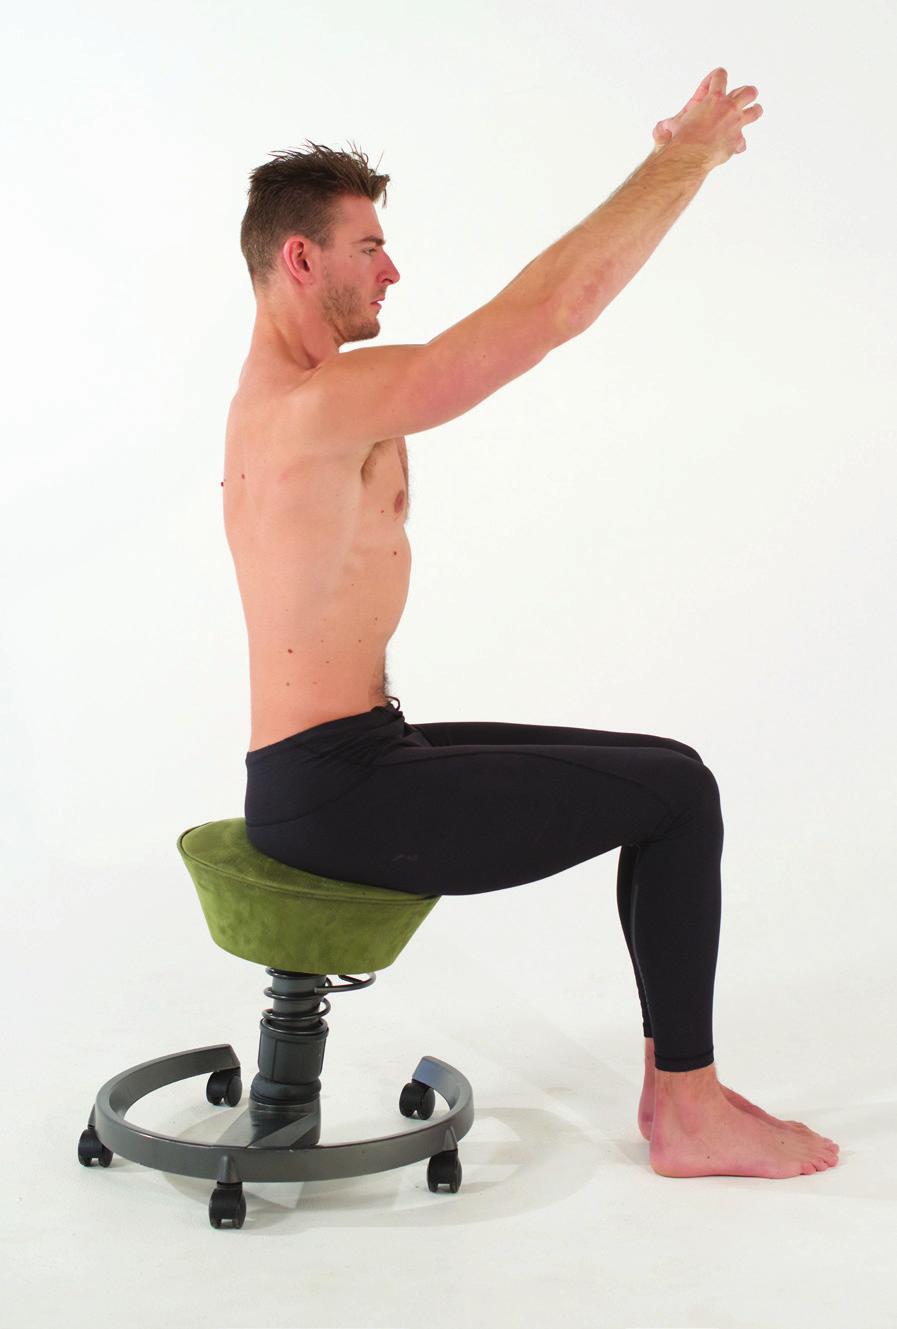 SEATED DECOMPRESSION 1 Slide toward the end of your chair and sit as tall as you can. Bring the ankles directly under the front of your knees and squeeze your feet and knees together.